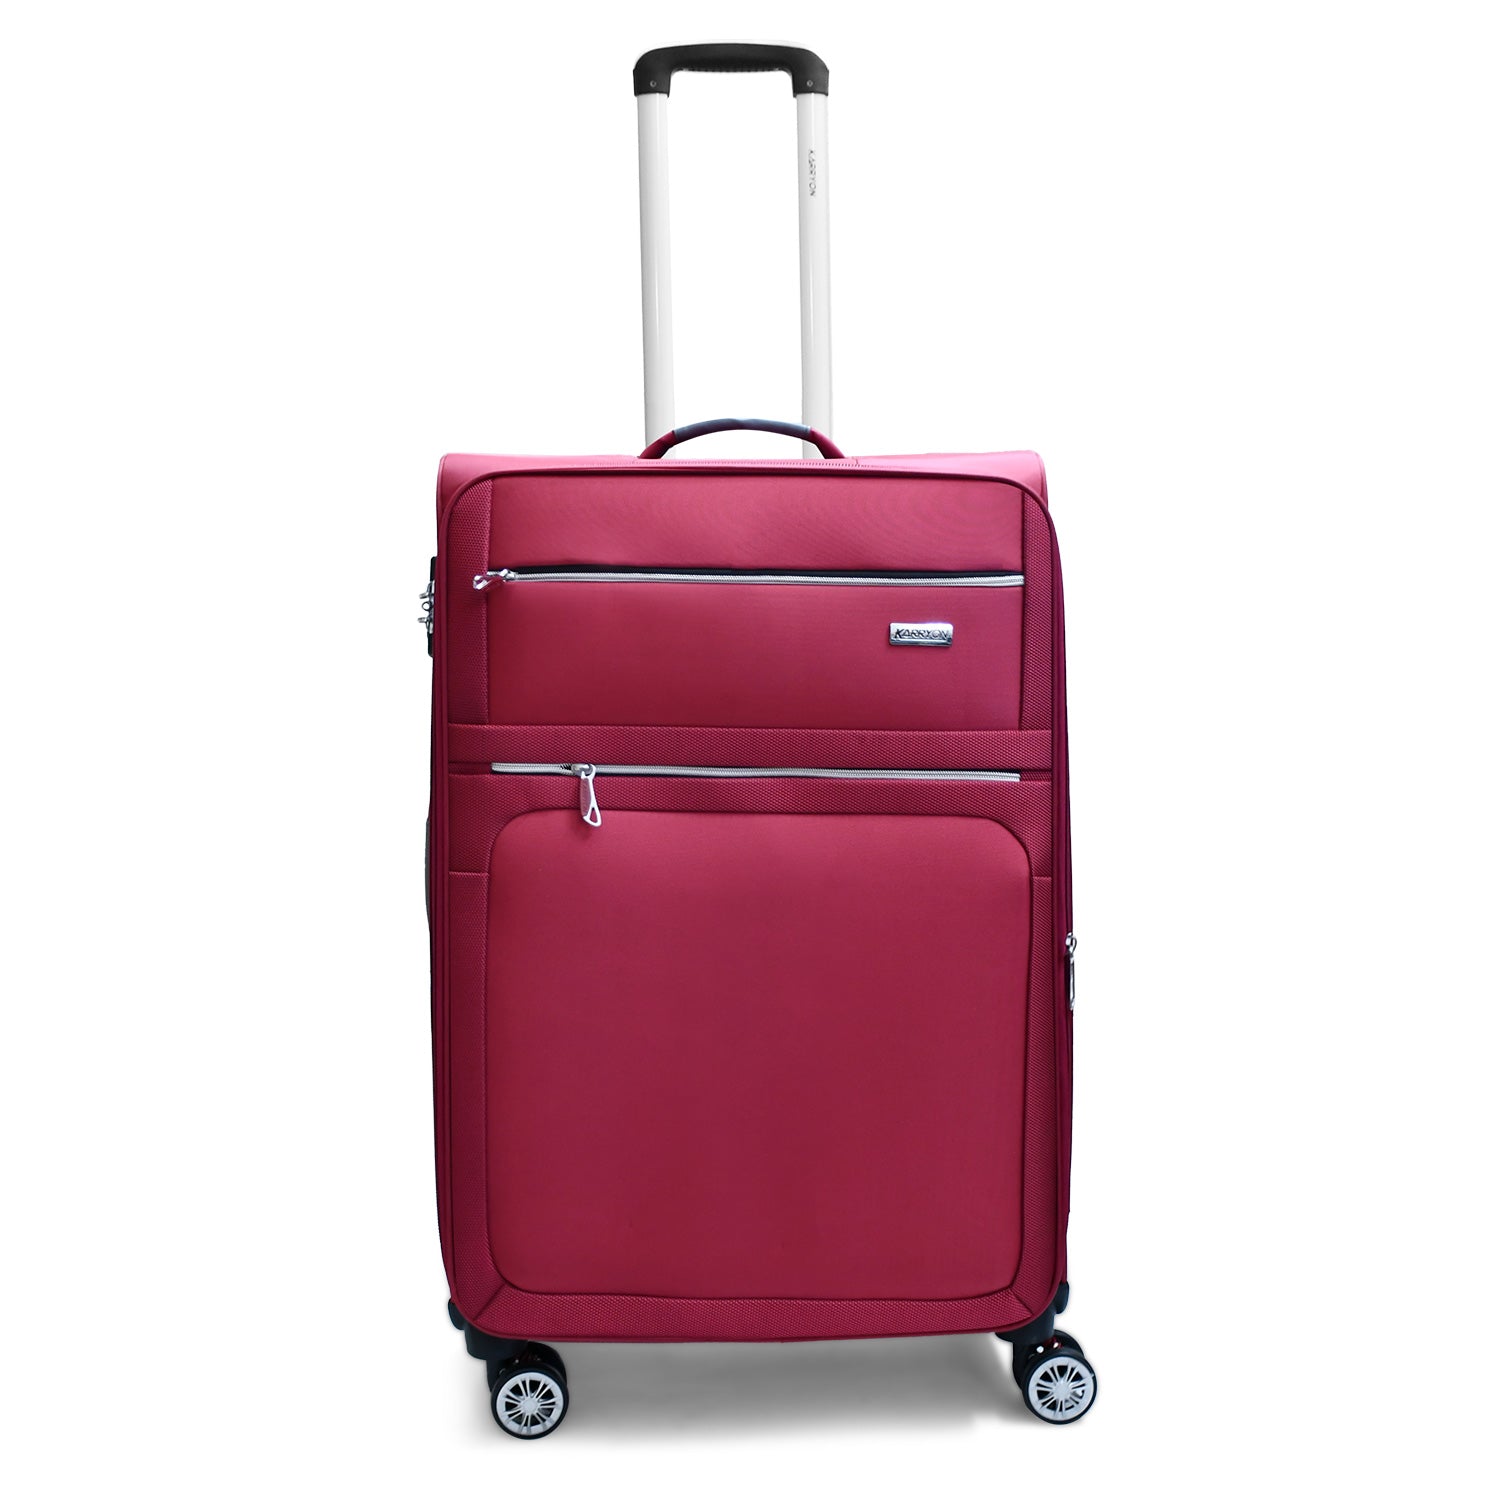 KARRY-ON AIREA DOUBLE WHEELED SOFT LUGGAGE